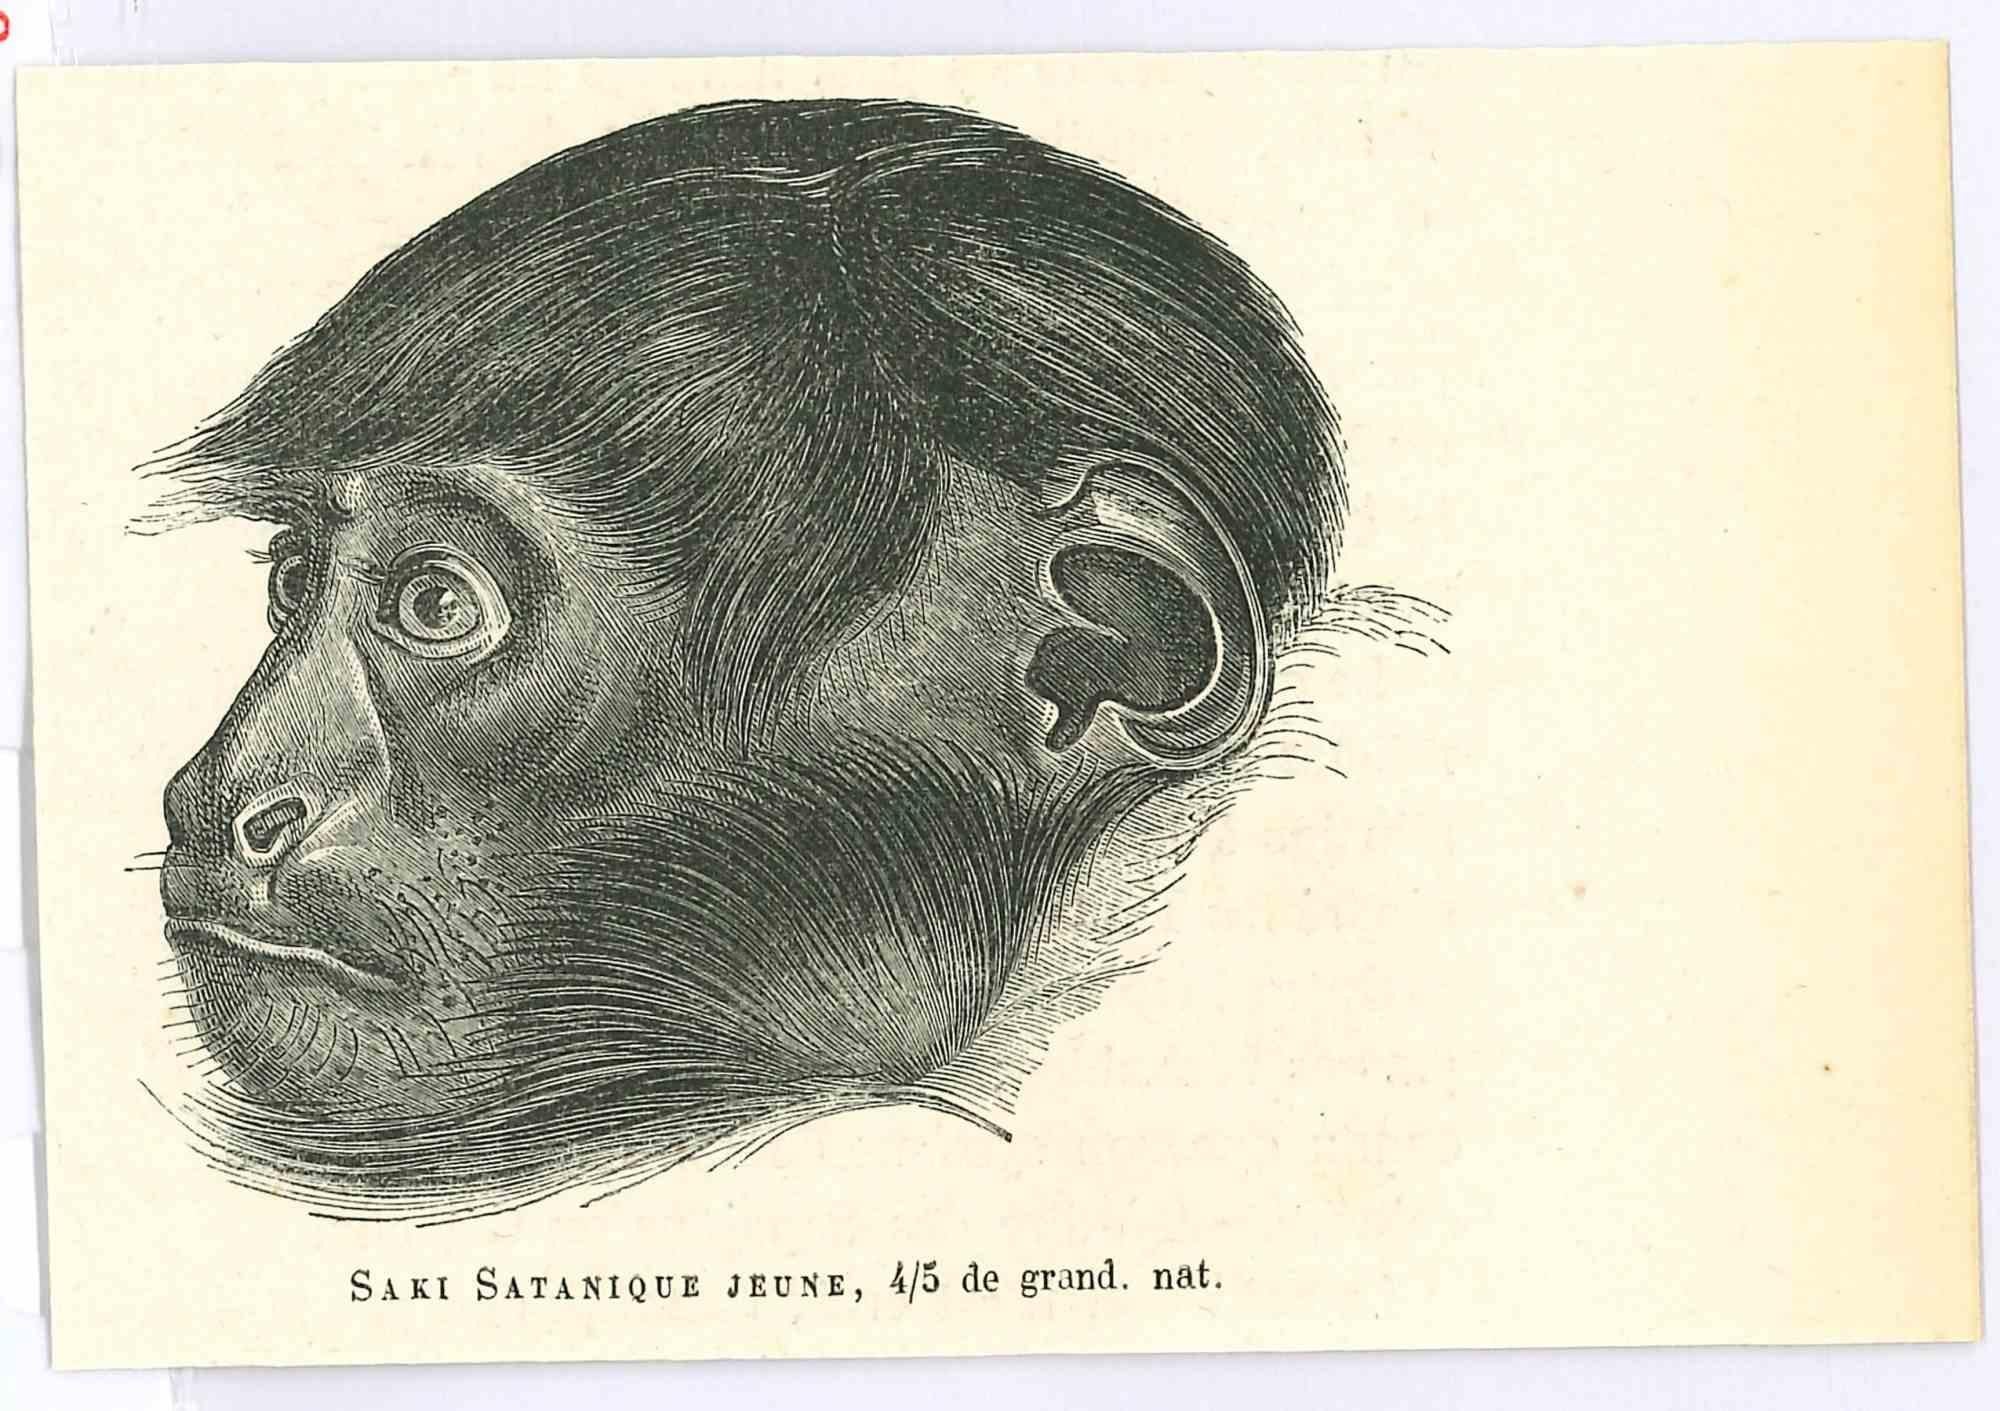 The Monkey - Lithograph by Paul Gervais - 1854